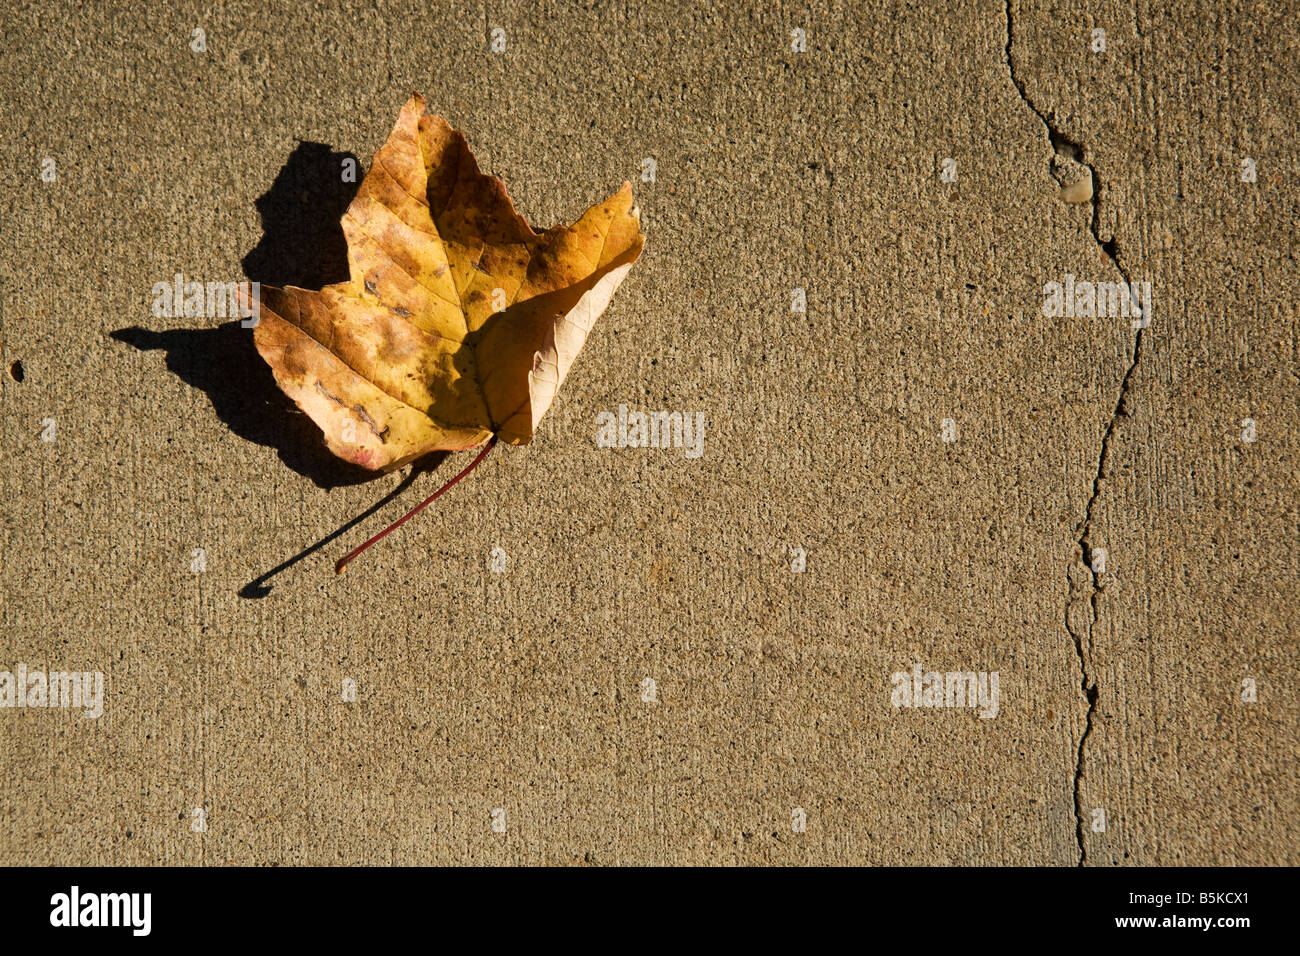 A fallen leaf on a cracked concrete floor Stock Photo